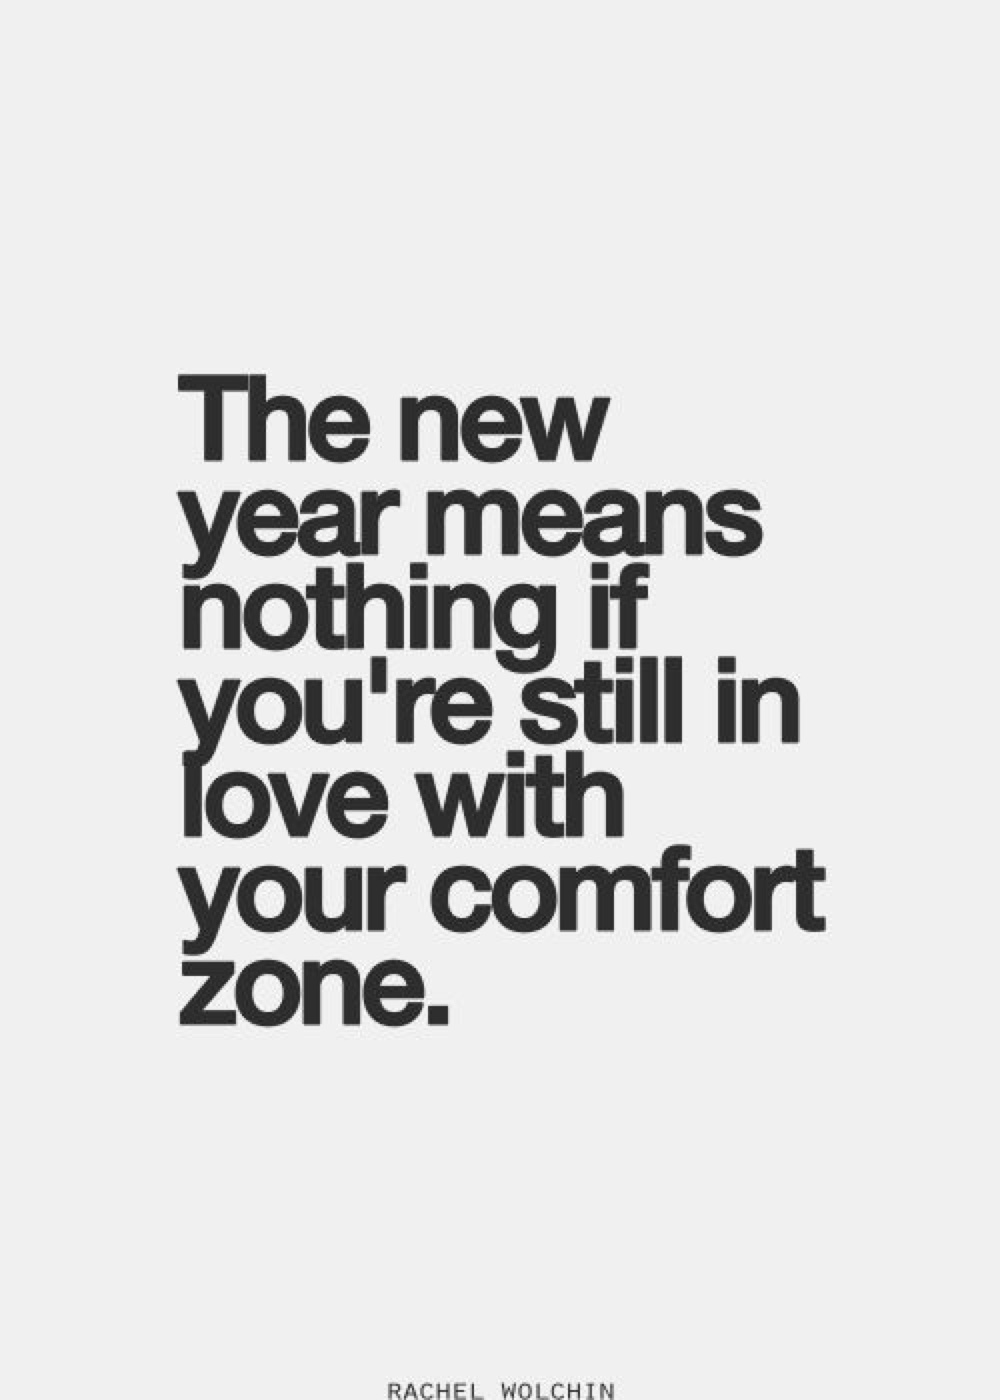 The new year means nothing if you're still in love with your comfort zone